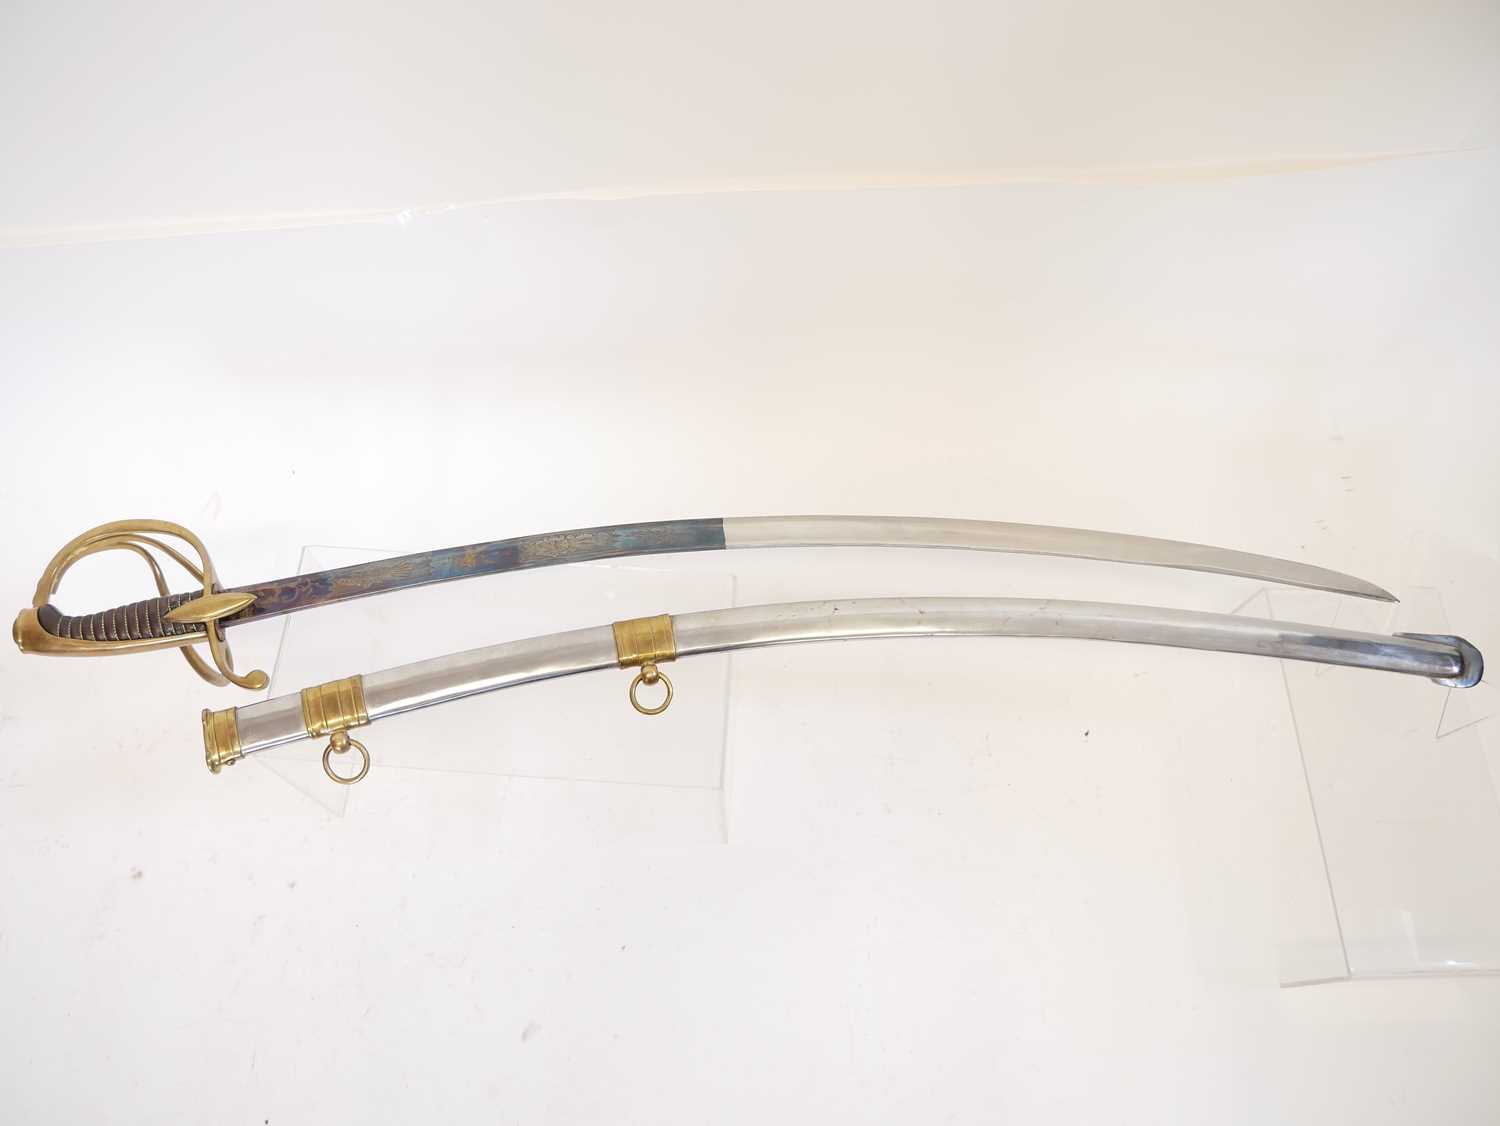 Reproduction copy of a French Cavalry sabre, with blue and gilt etched blade. Buyer must be over the - Image 6 of 7